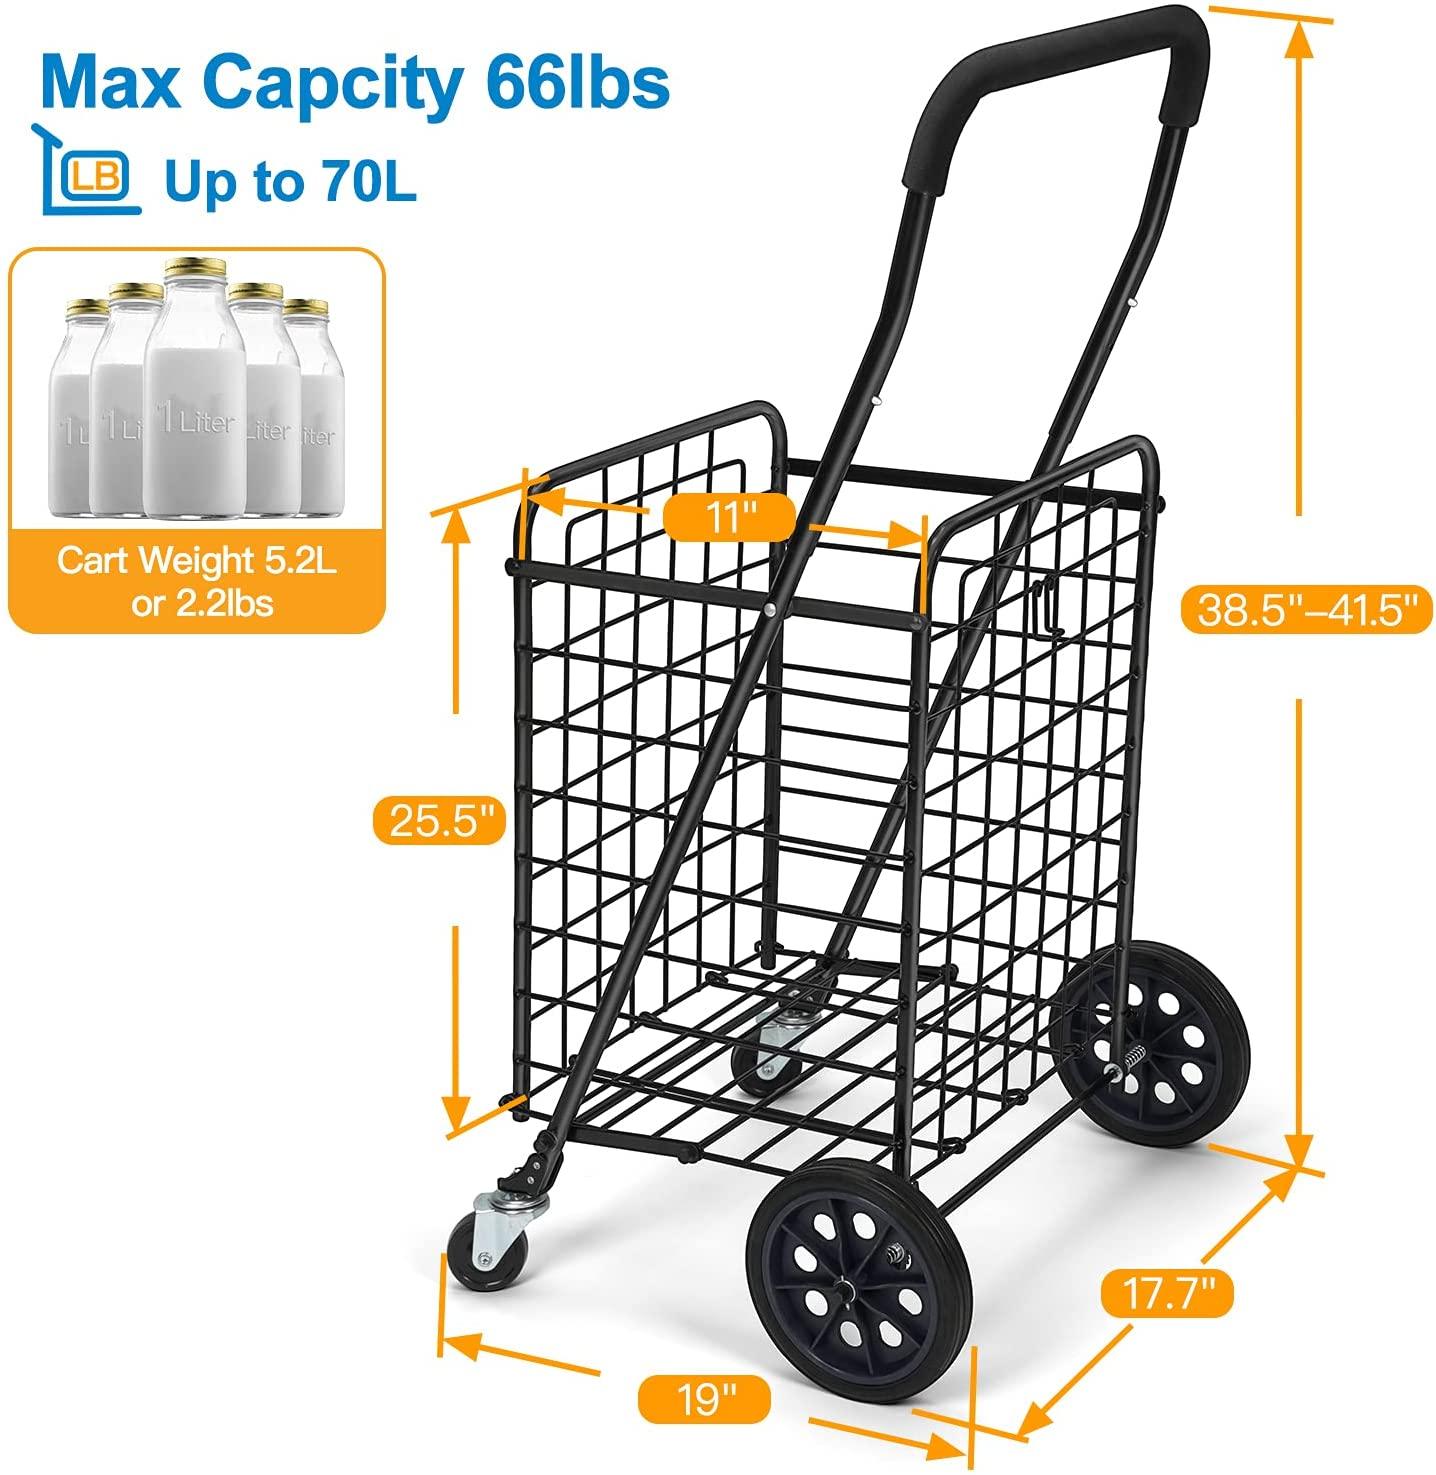 Shopping Cart with Dual Swivel Wheels for Groceries - Compact Folding Portable Cart Saves Space - with Adjustable Handle Height - Lightweight Easy to Move Holds up to 70L/Max 66Ibs - TheGivenGet